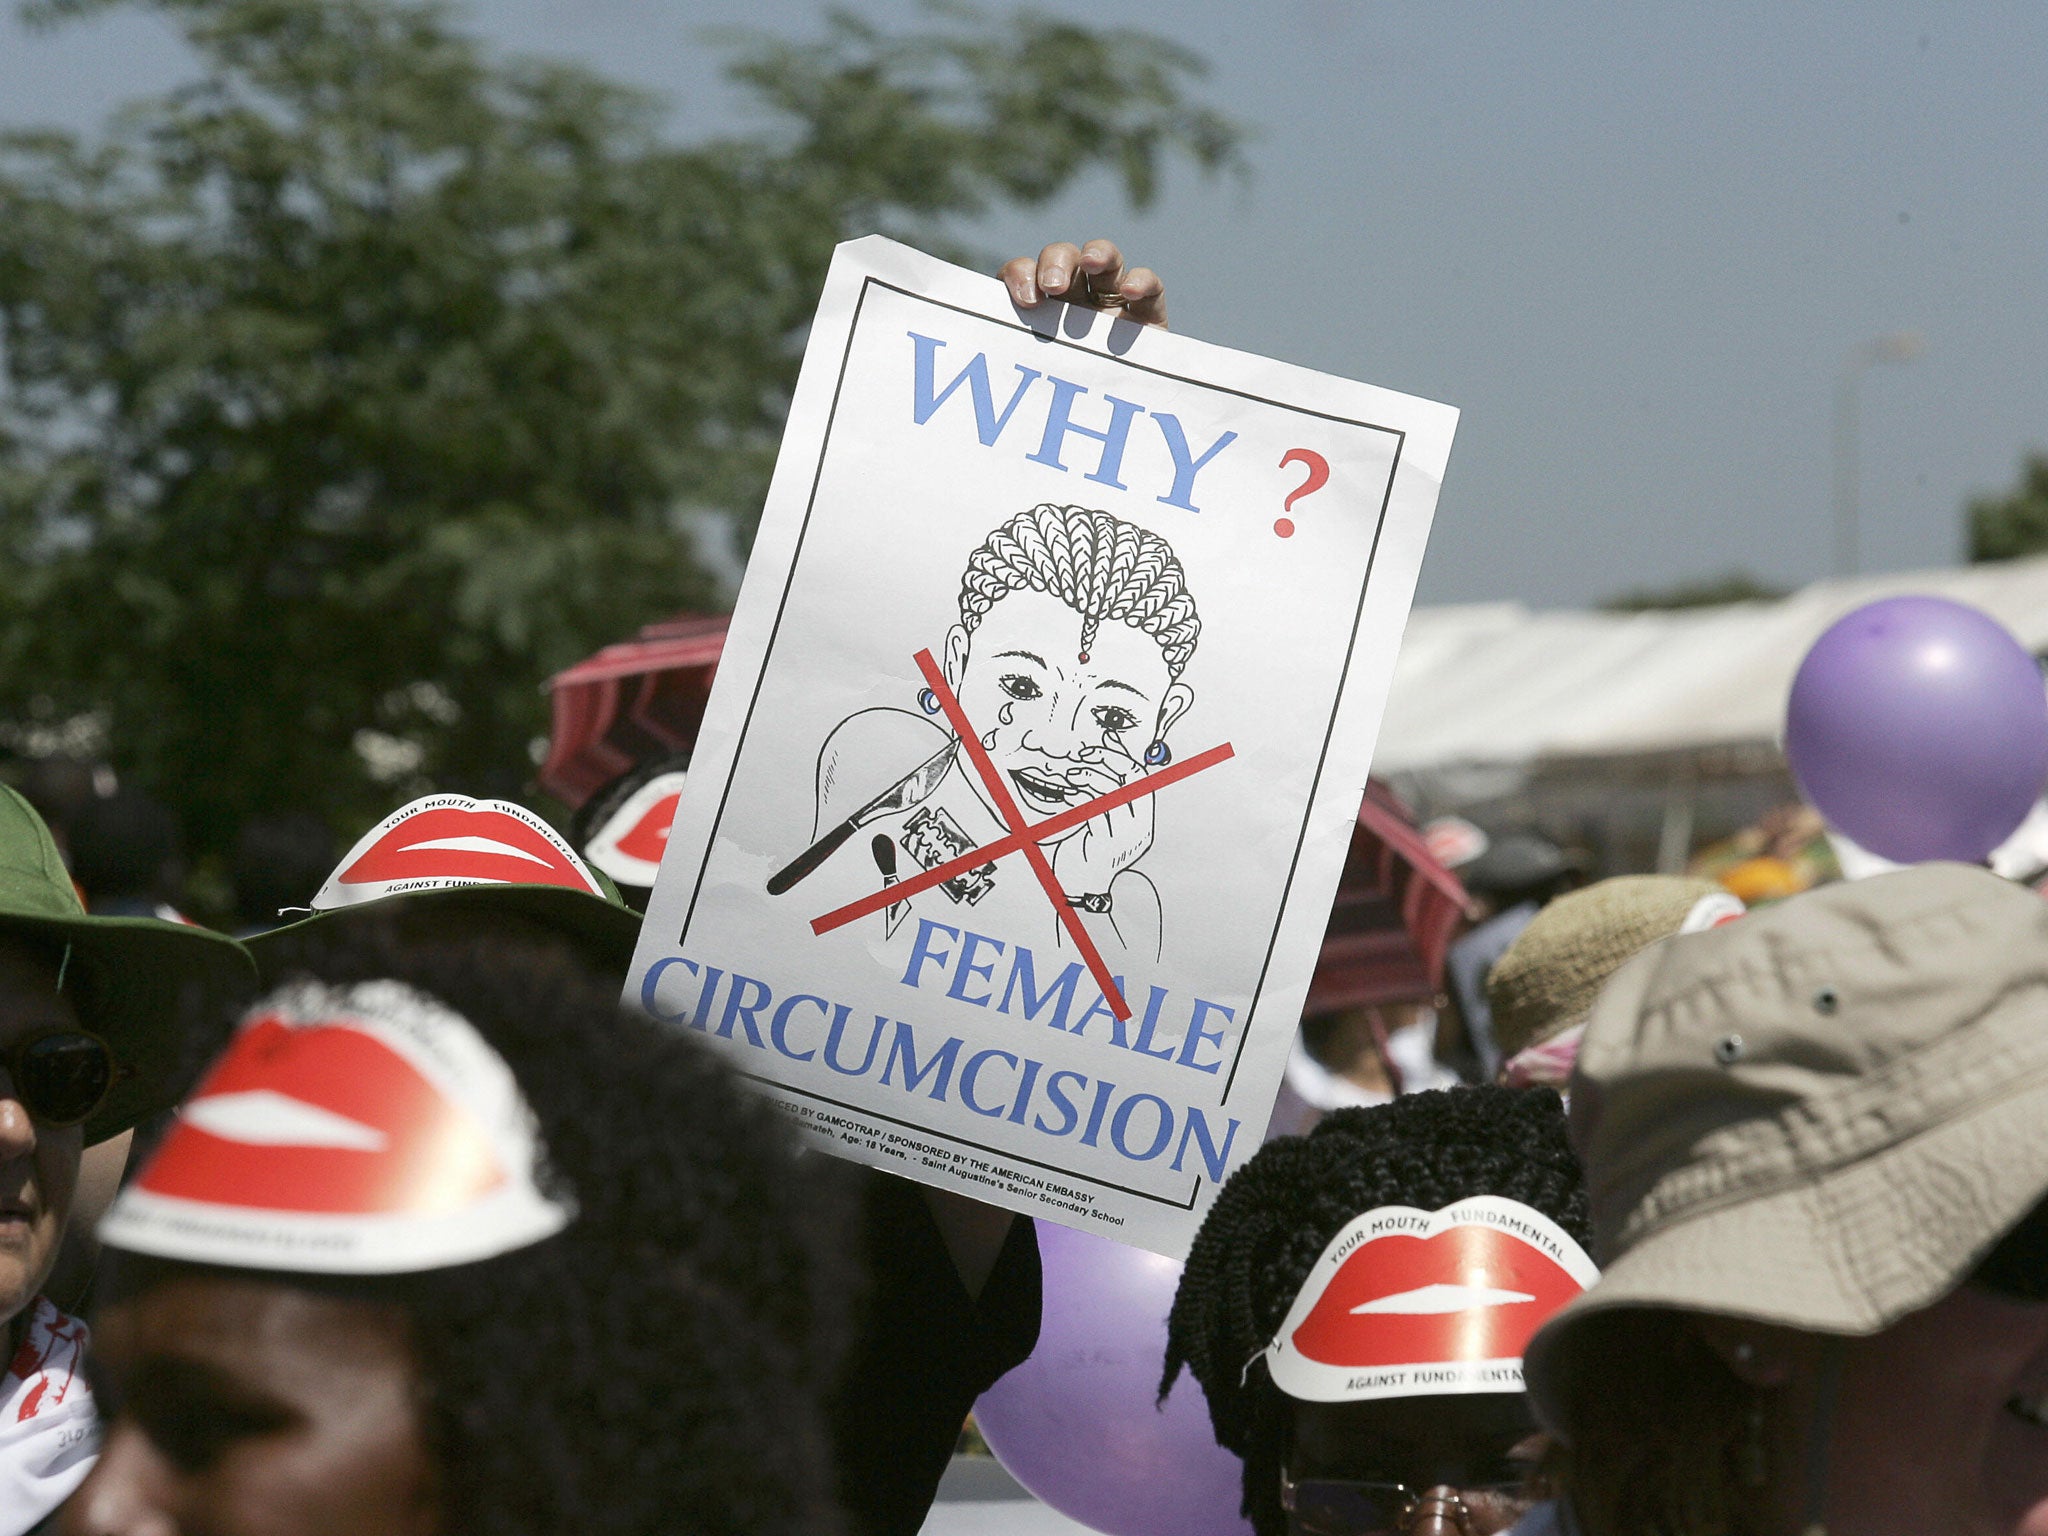 Members of African Gay and Lesbian communities demonstrate against female genital mutilation, 23 January 2007 at the Nairobi World Social Forum venue in Kasarani, Nairobi. Some 46,000 participants are attending the seventh edition of the World Social Forum taking place this week in Kenya, organisers said Monday as hundreds of youths protested registration charges. Organisers had hoped to attract about 160,000 anti-globalisation activists, but about one third of that figure turned up for the conference that kicked off in Nairobi at the weekend and set to conclude on Thursday.